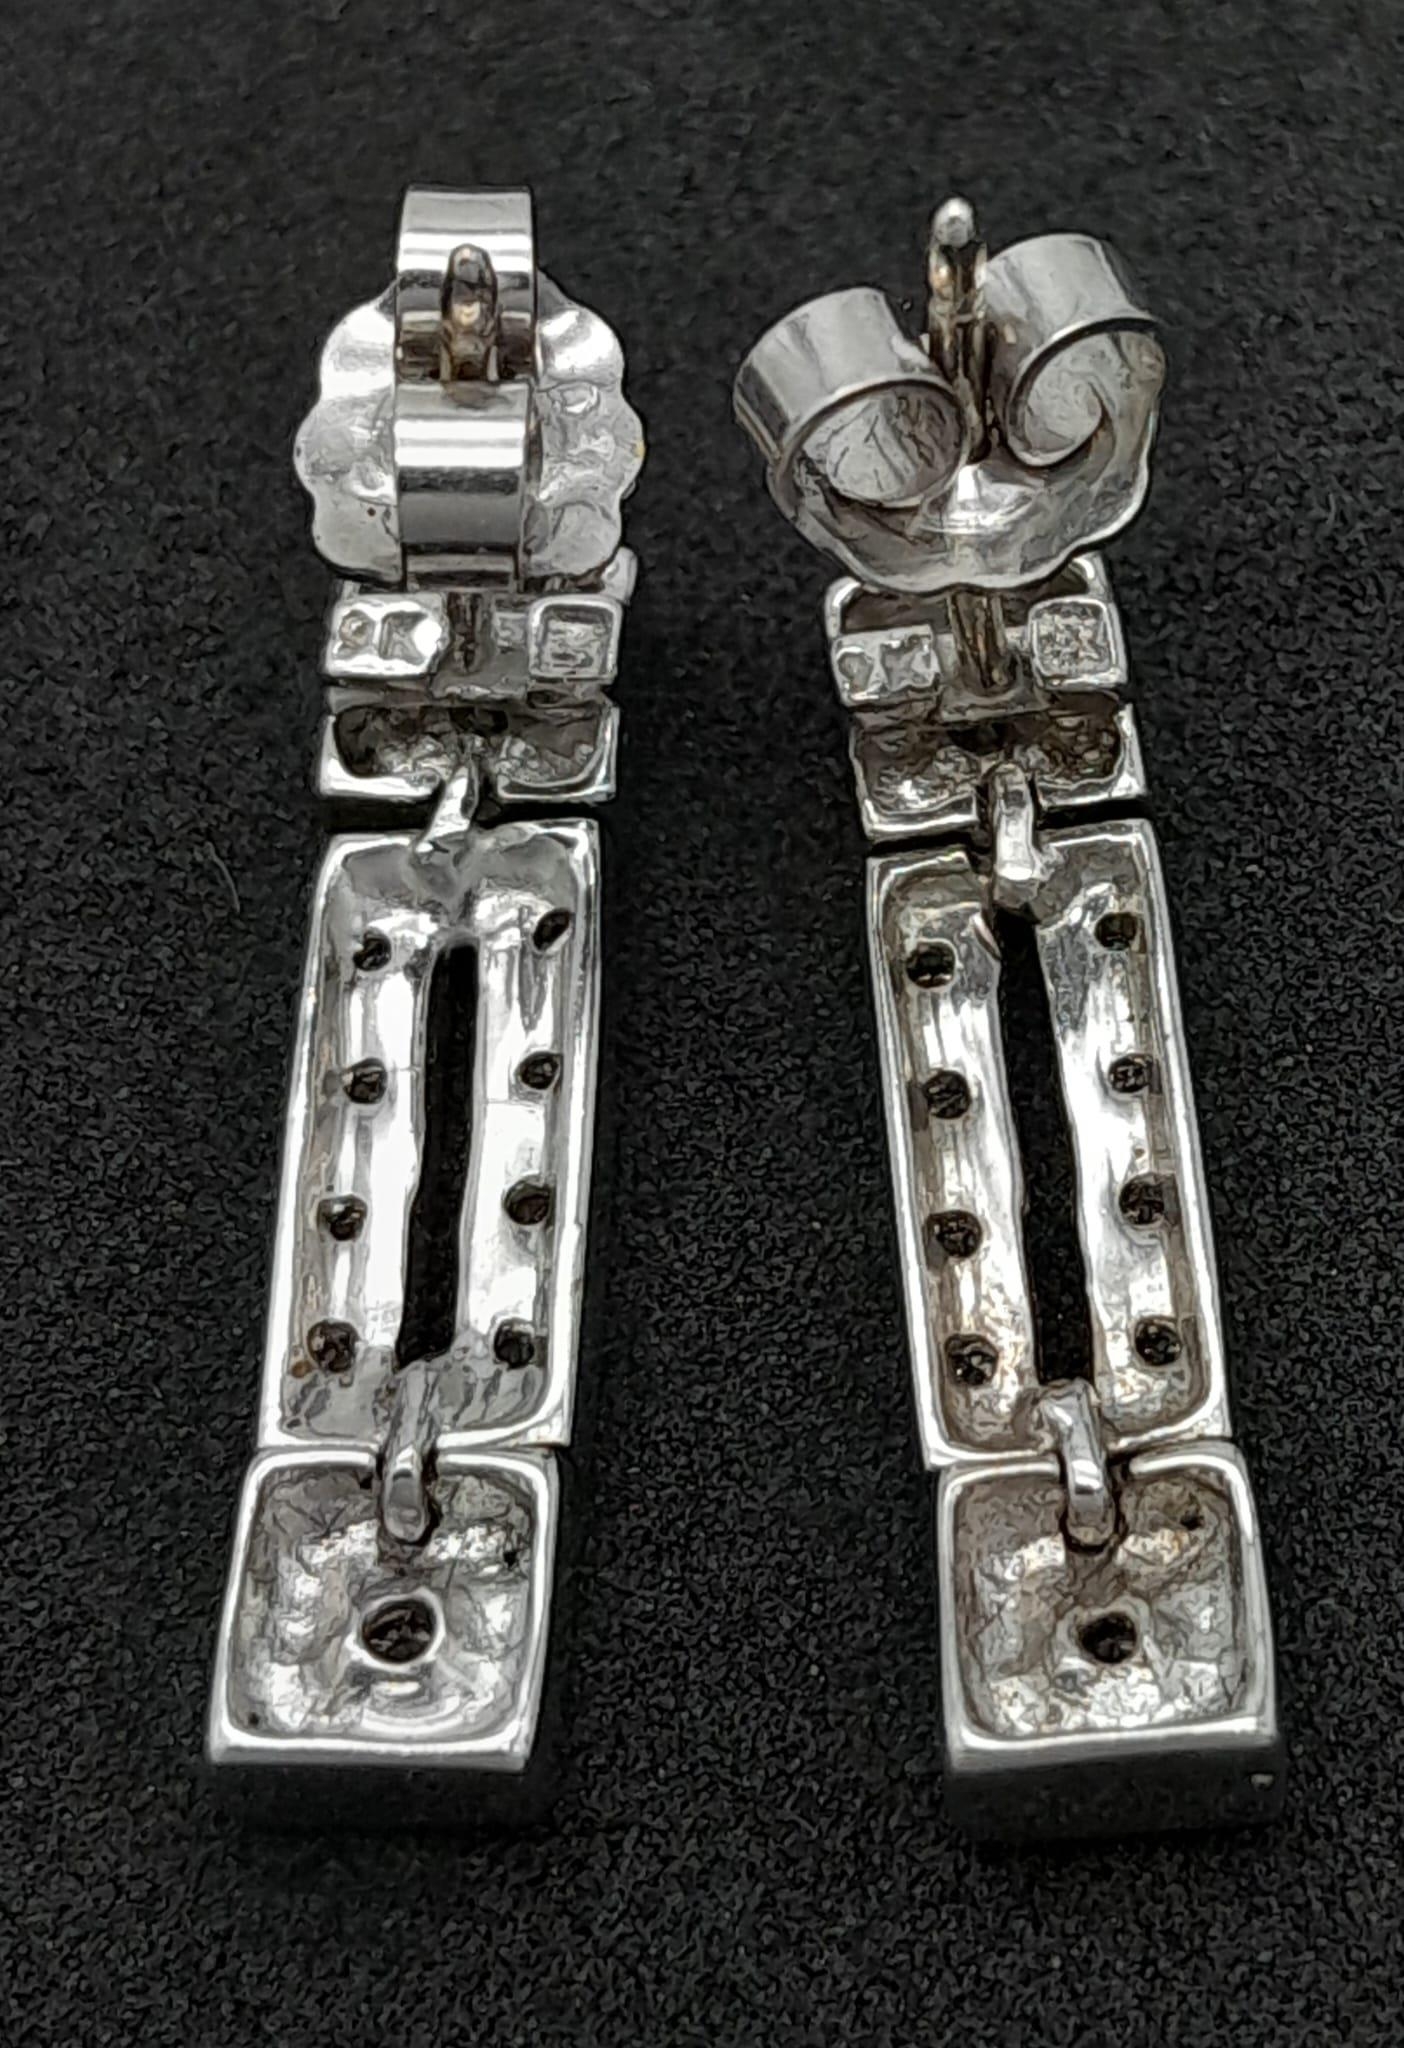 A pair of 10K White Gold Diamond Long Studs earrings, 0.12ct diamond weight, 4.1g total weight - Image 2 of 5